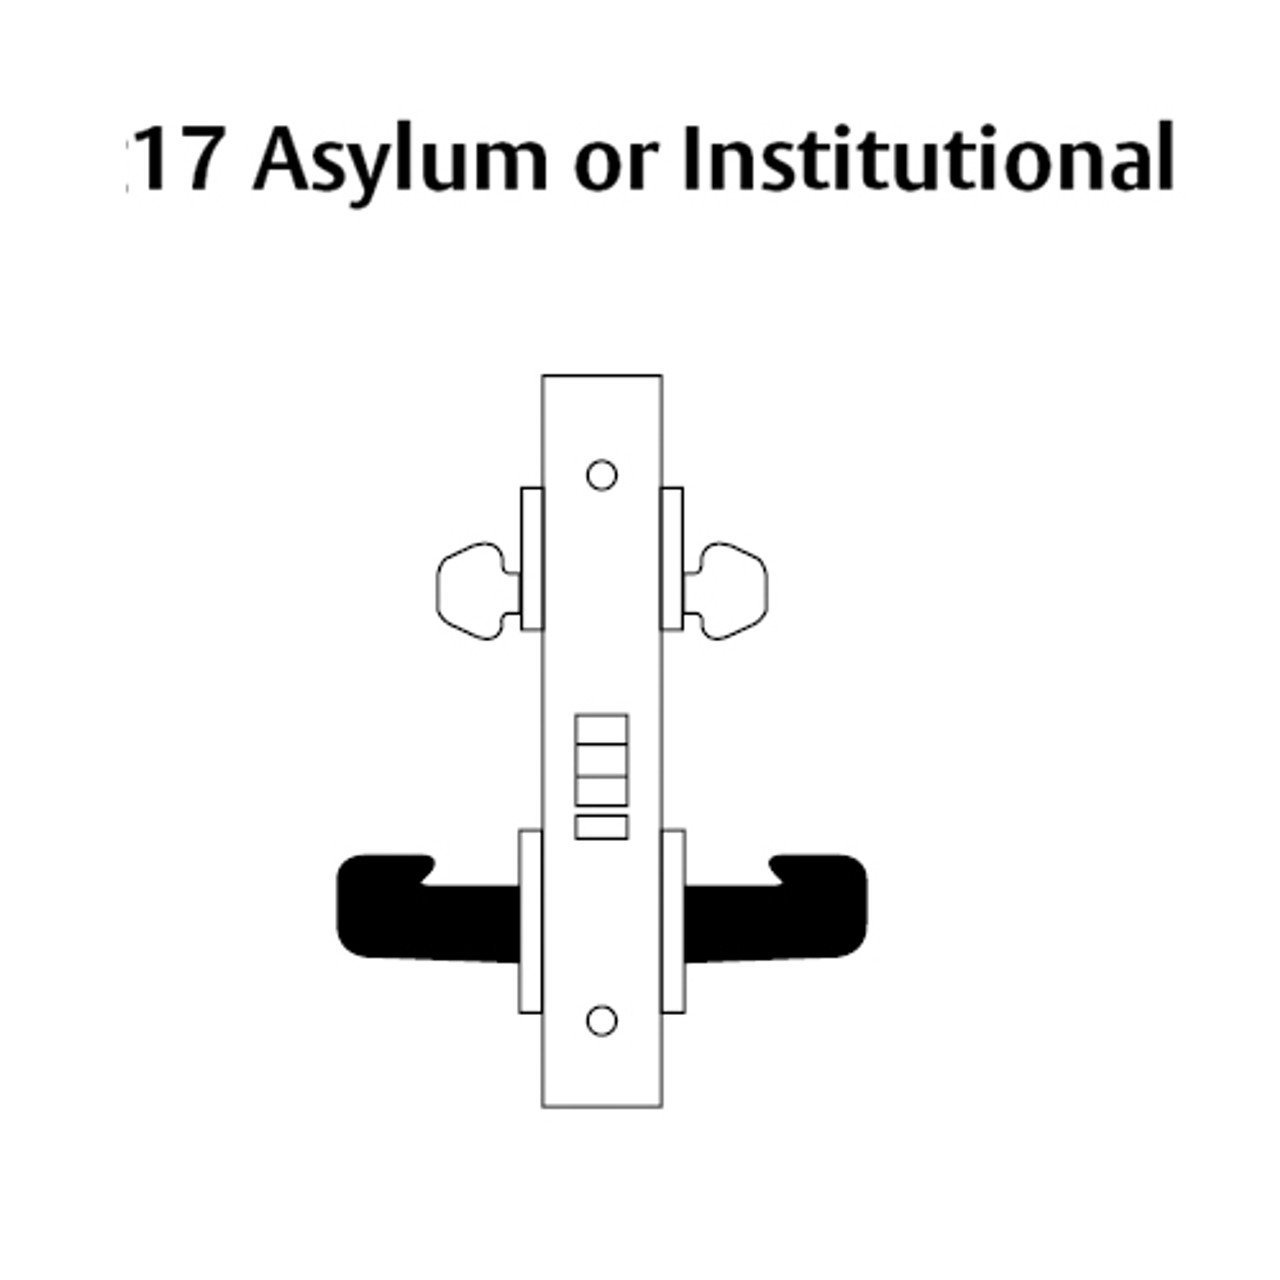 LC-8217-LNP-04 Sargent 8200 Series Asylum or Institutional Mortise Lock with LNP Lever Trim Less Cylinder in Satin Brass